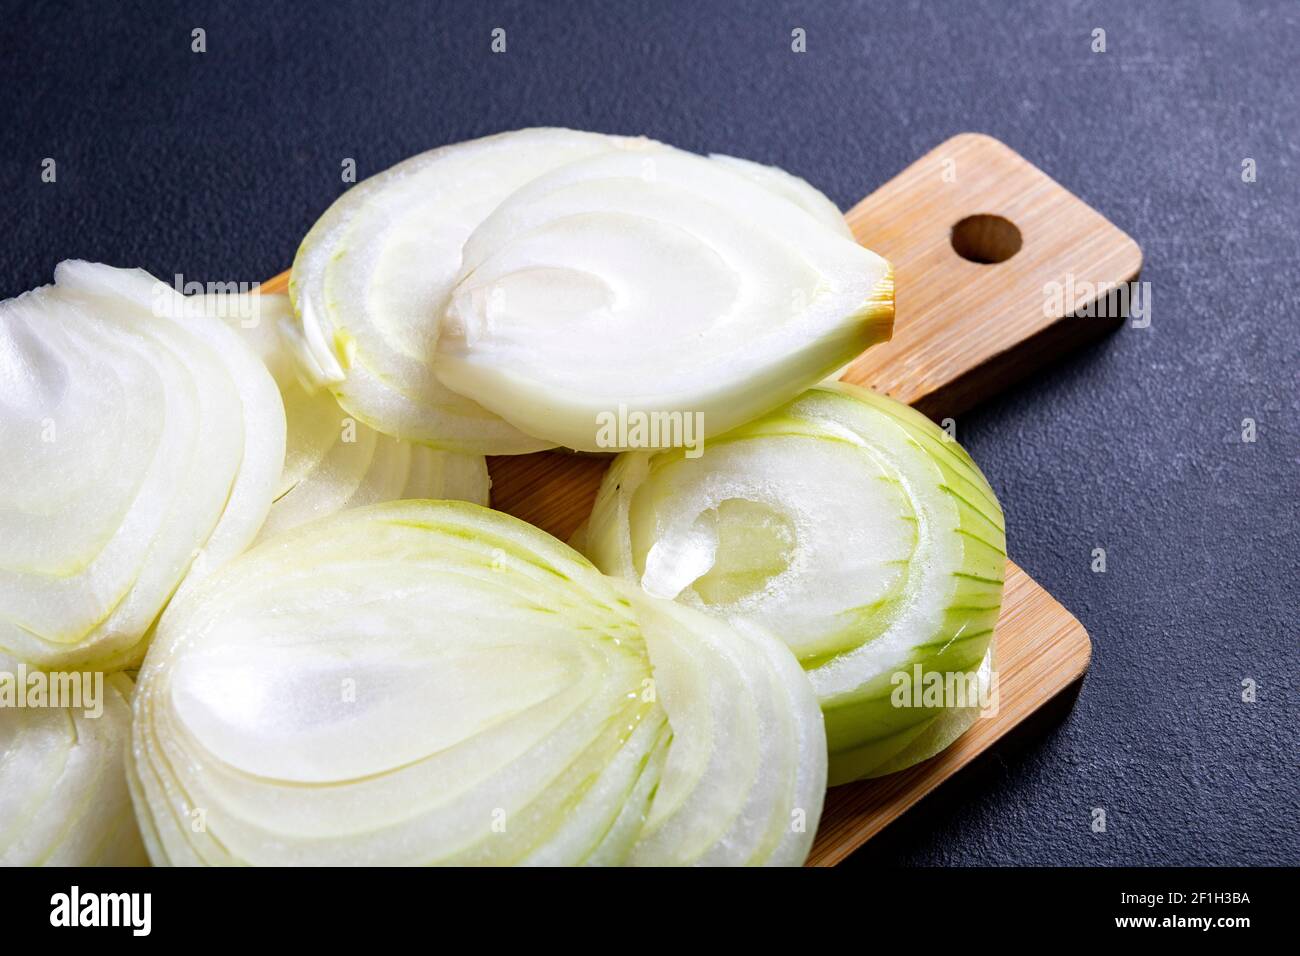 Sliced onion placed on a wooden board. Vegetables in the kitchen prepared  to serve. Dark background Stock Photo - Alamy